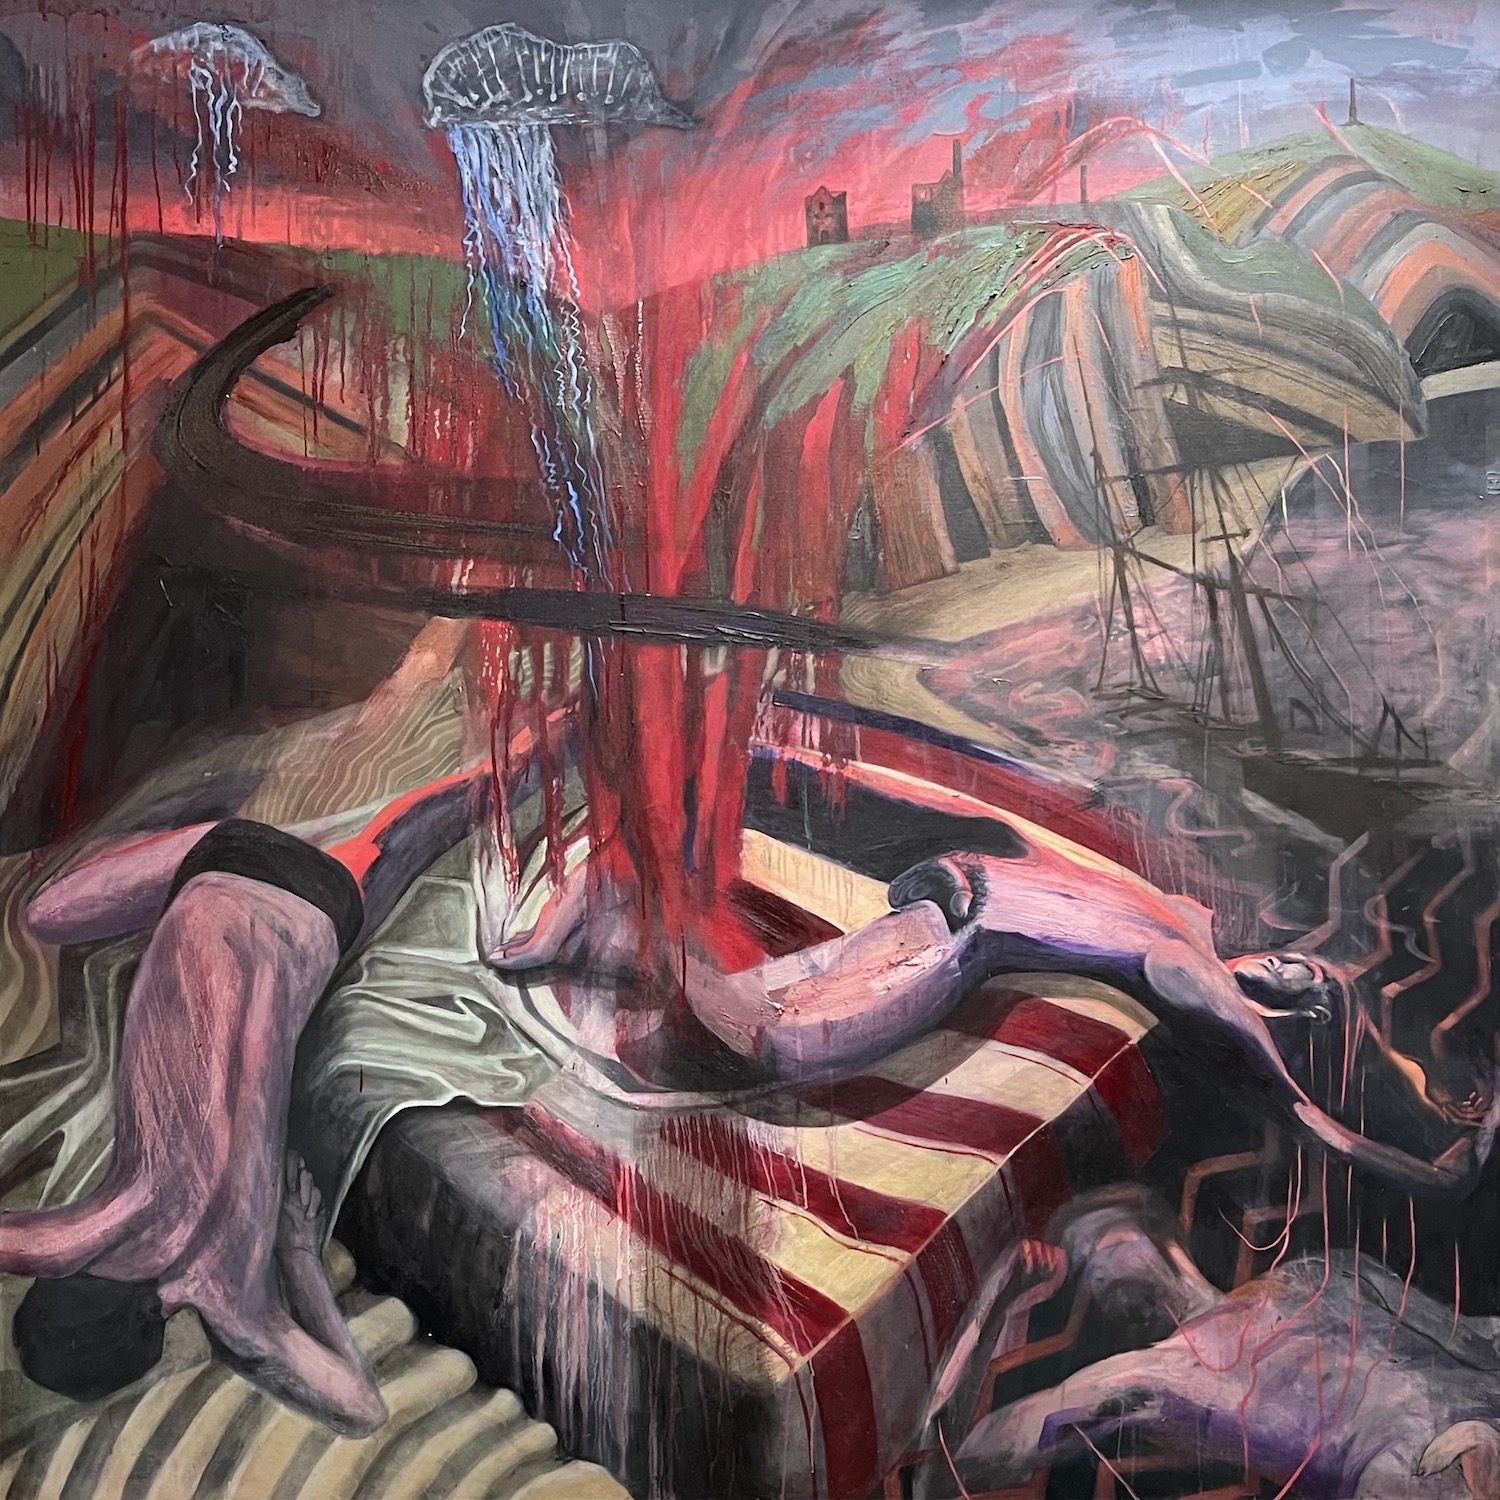 'Cornish Landscape With Figures And Portuguese Man O'war', James Dearlove, Oil and acrylic on linen, 200 x 200 cm